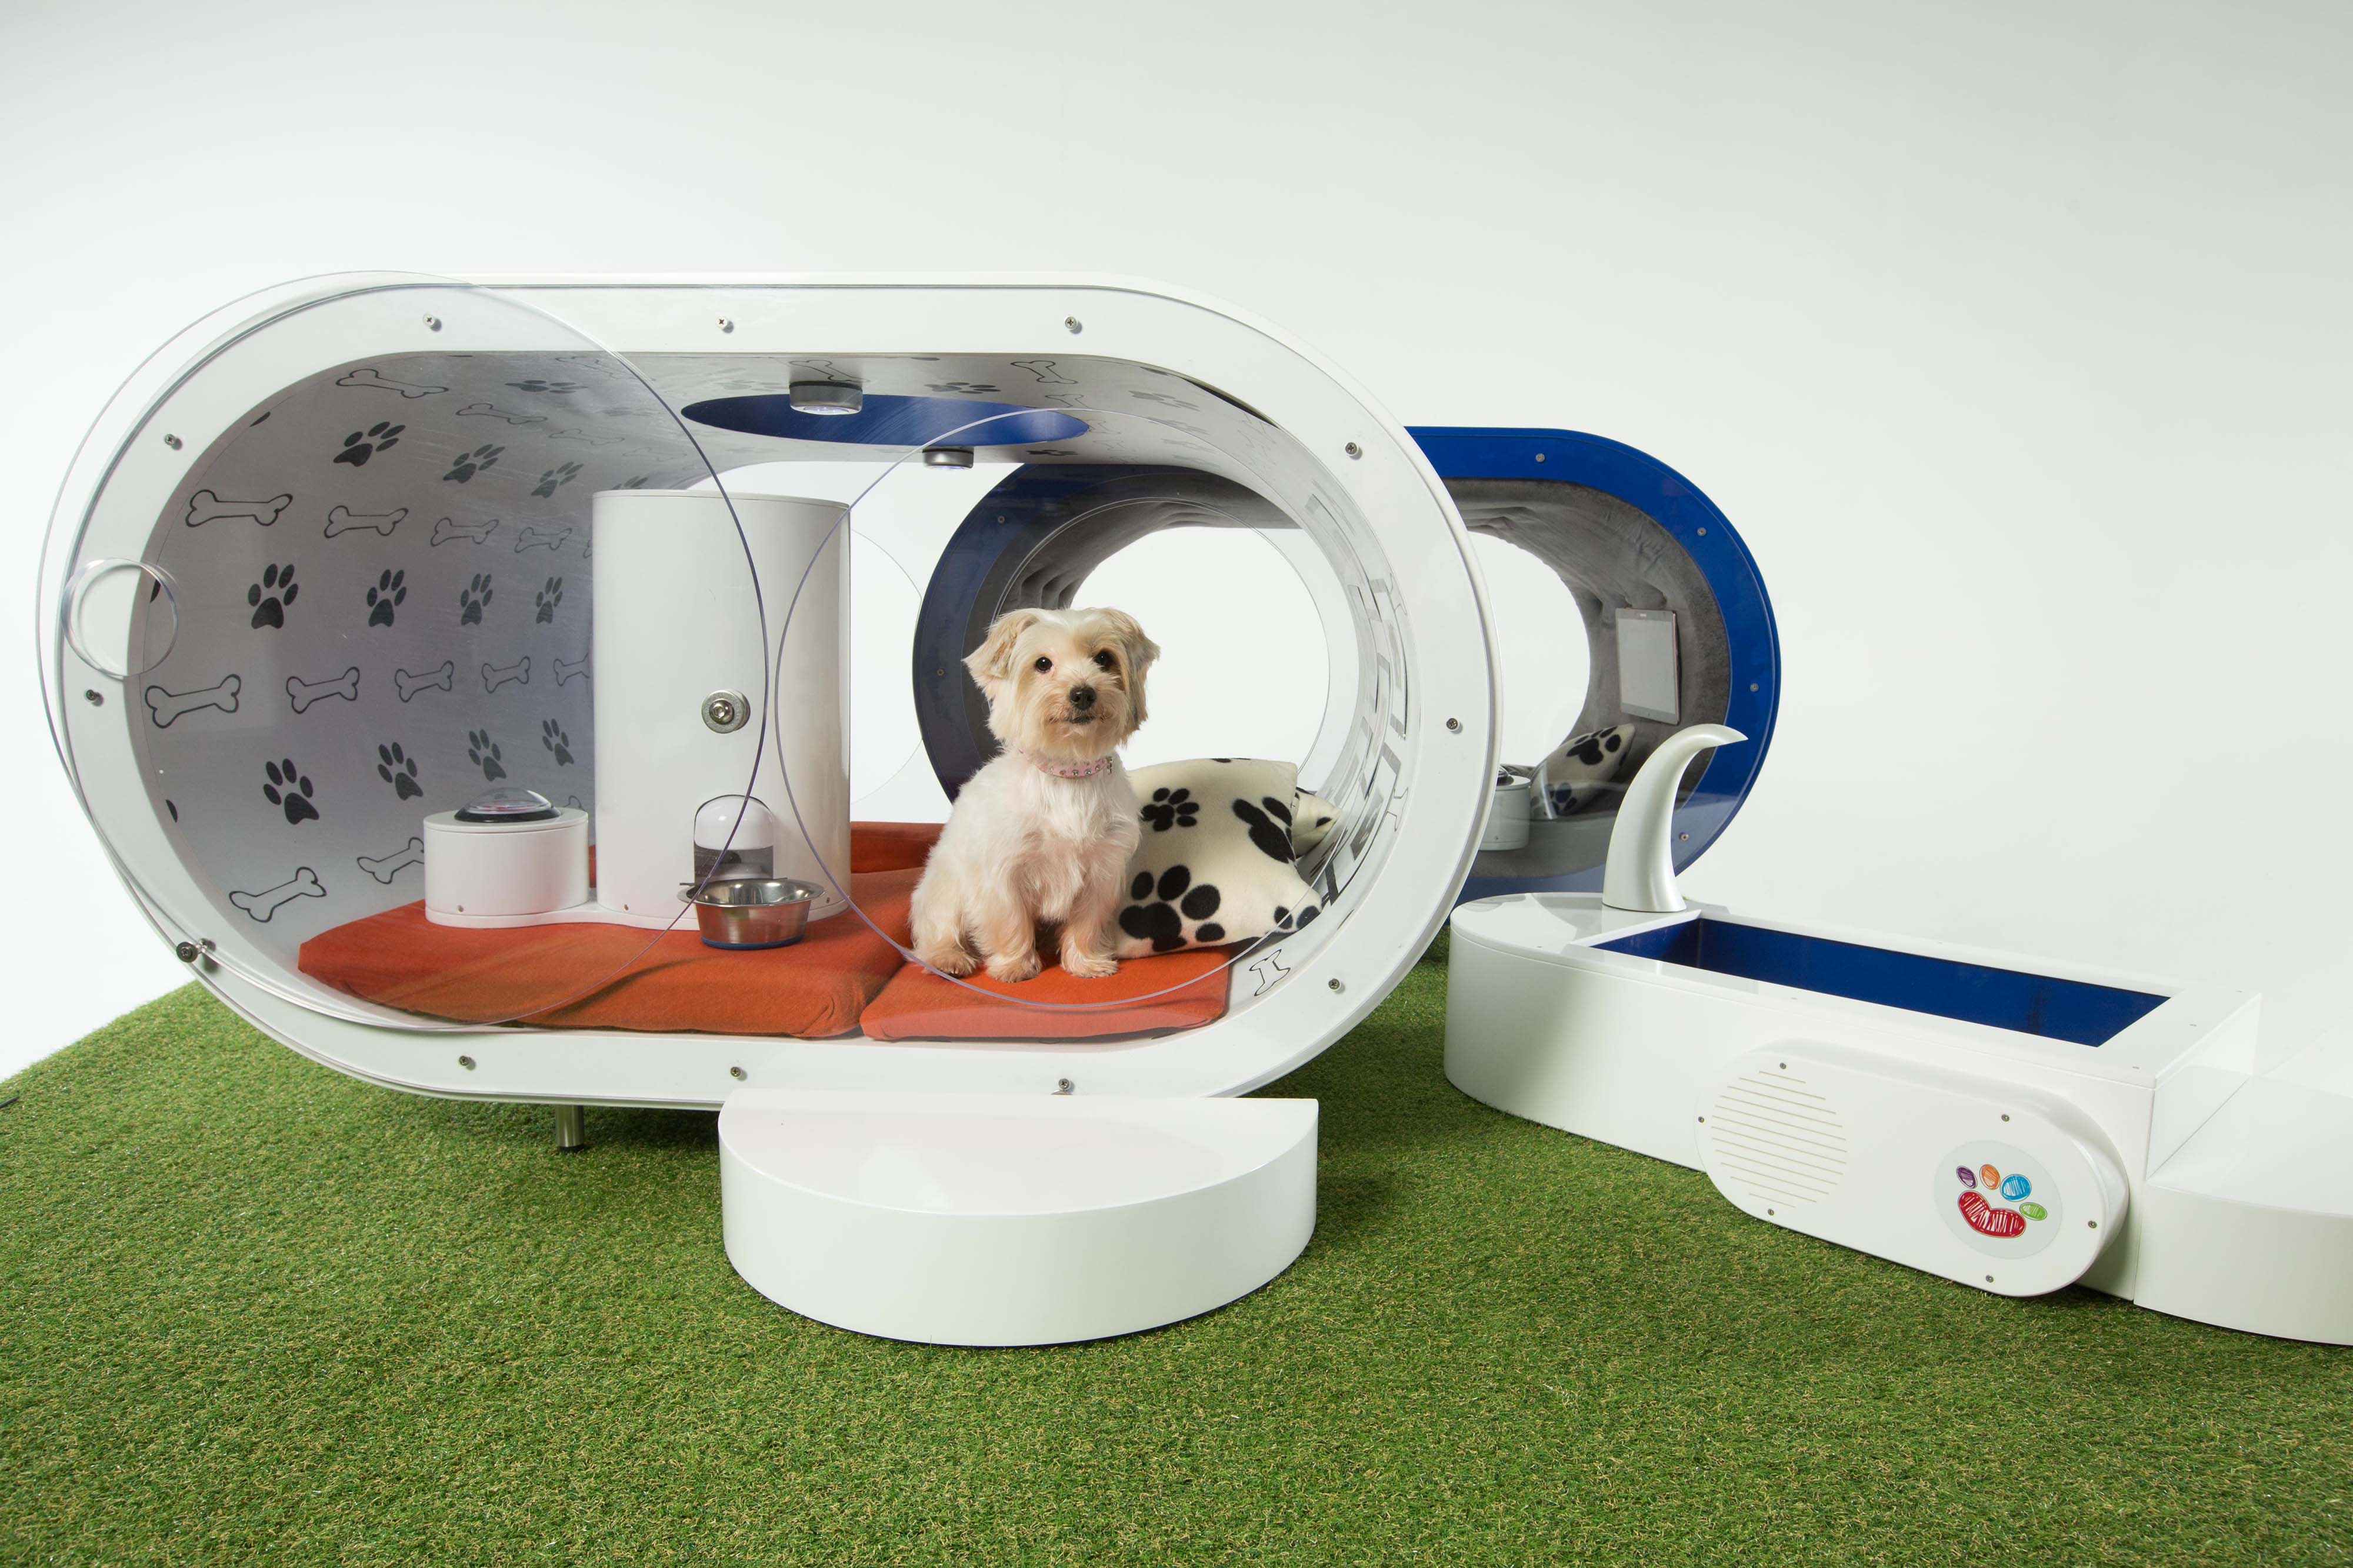 Samsung launches $31K dog kennel